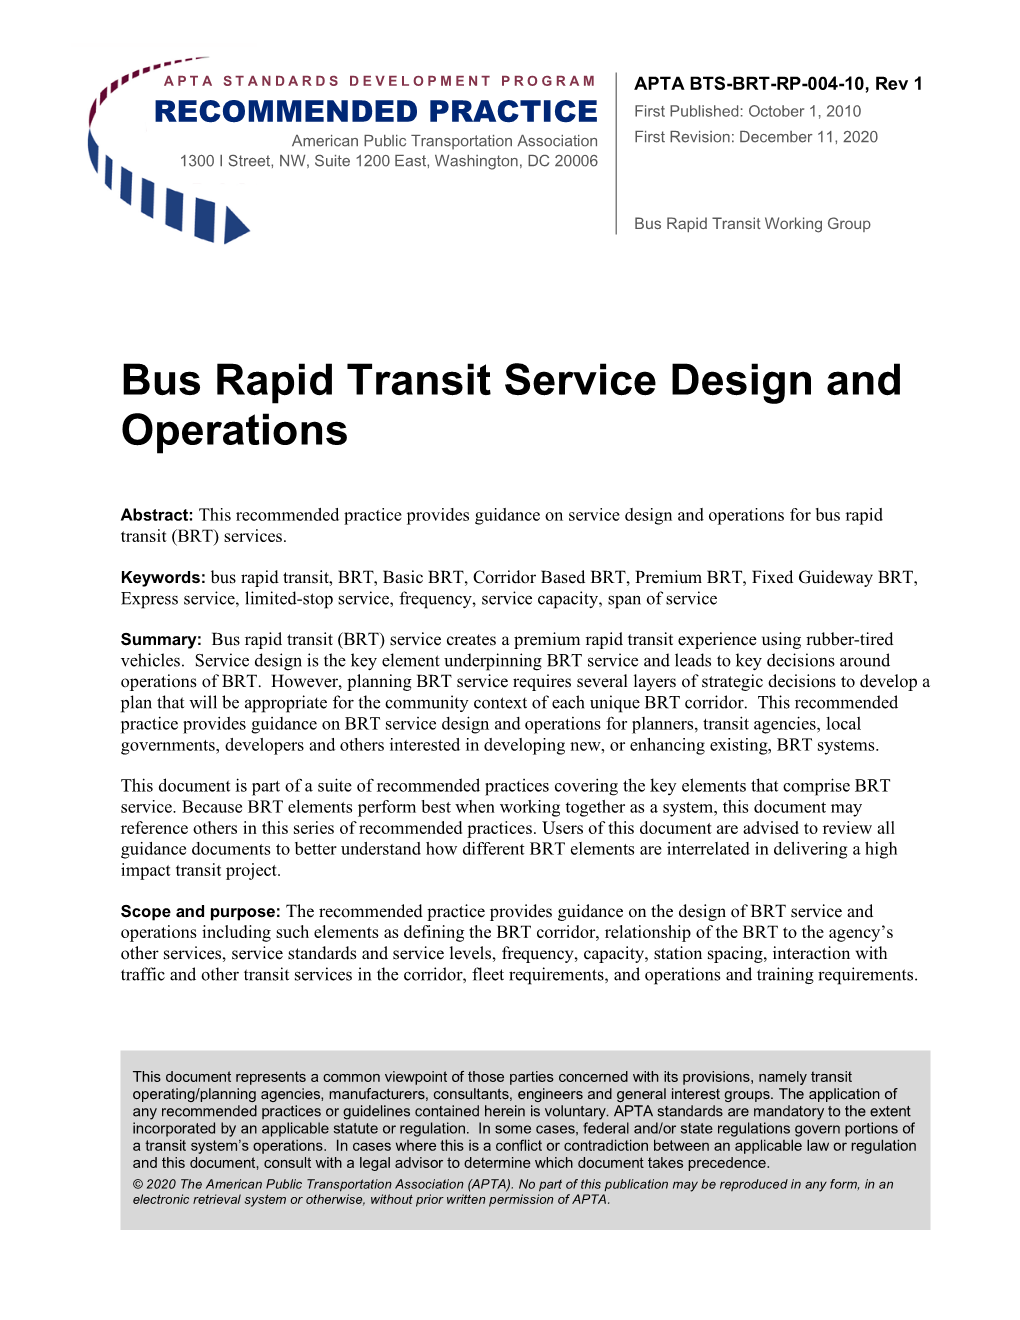 Bus Rapid Transit Service Design and Operations